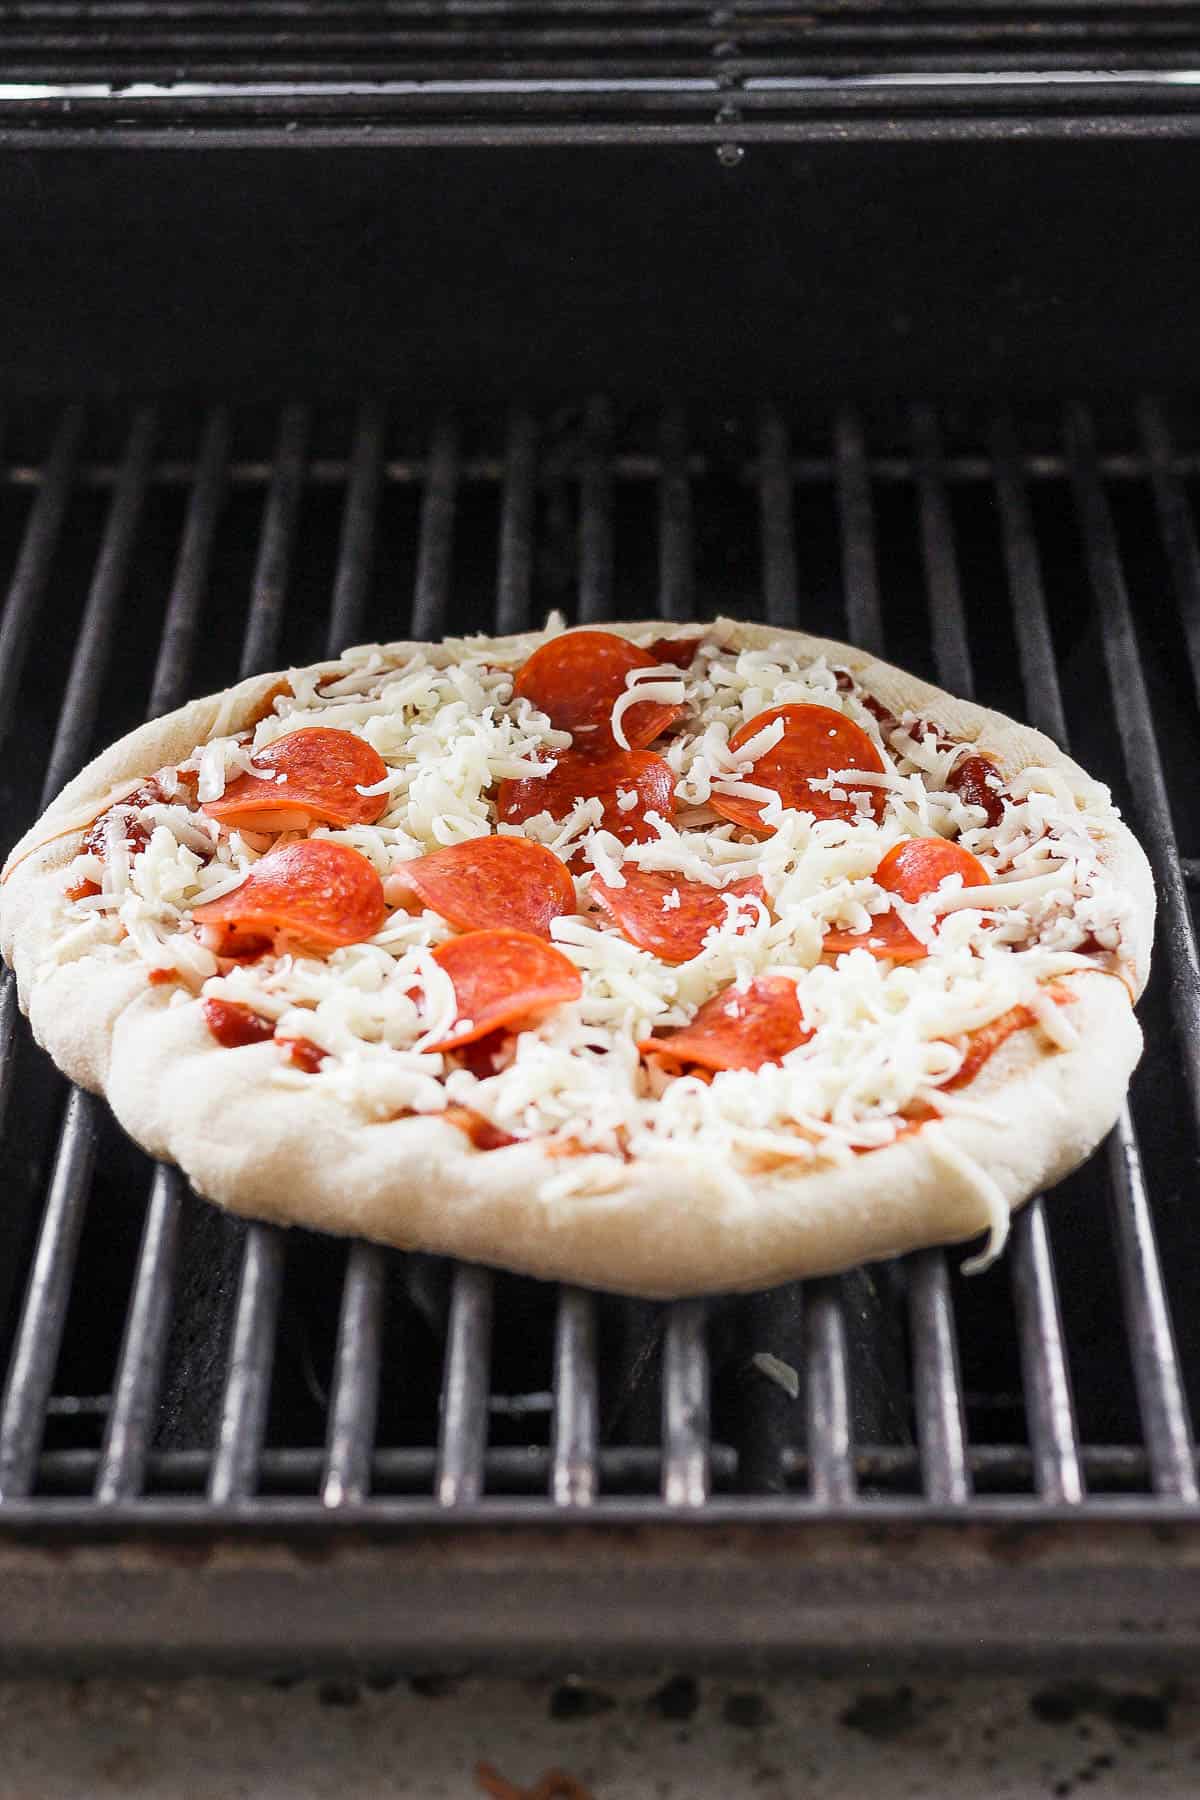 A fully topped pizza placed back on the grill.